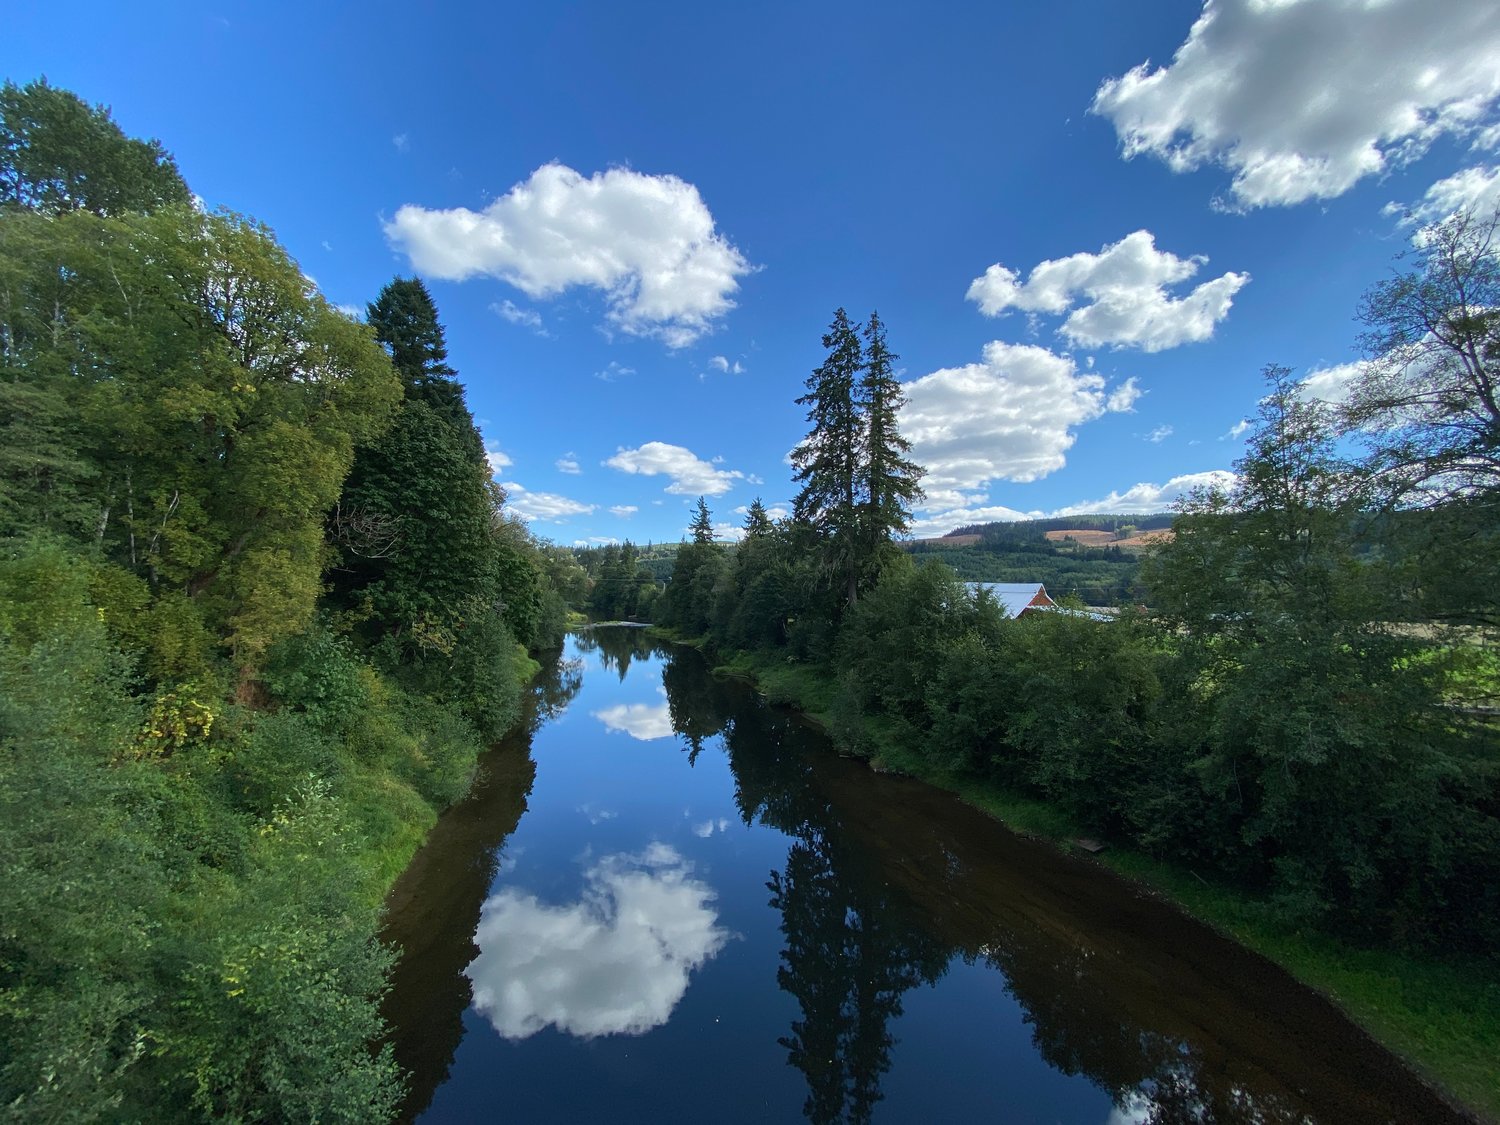 The mirror-like Chehalis River reflects the summer sky on the Willapa Hills Trail at Bridge 16 near Dryad. The bridge was rebuilt in 2015 with Federal Emergency Management Agency funds, replacing a span destroyed in the 2007 flood. 